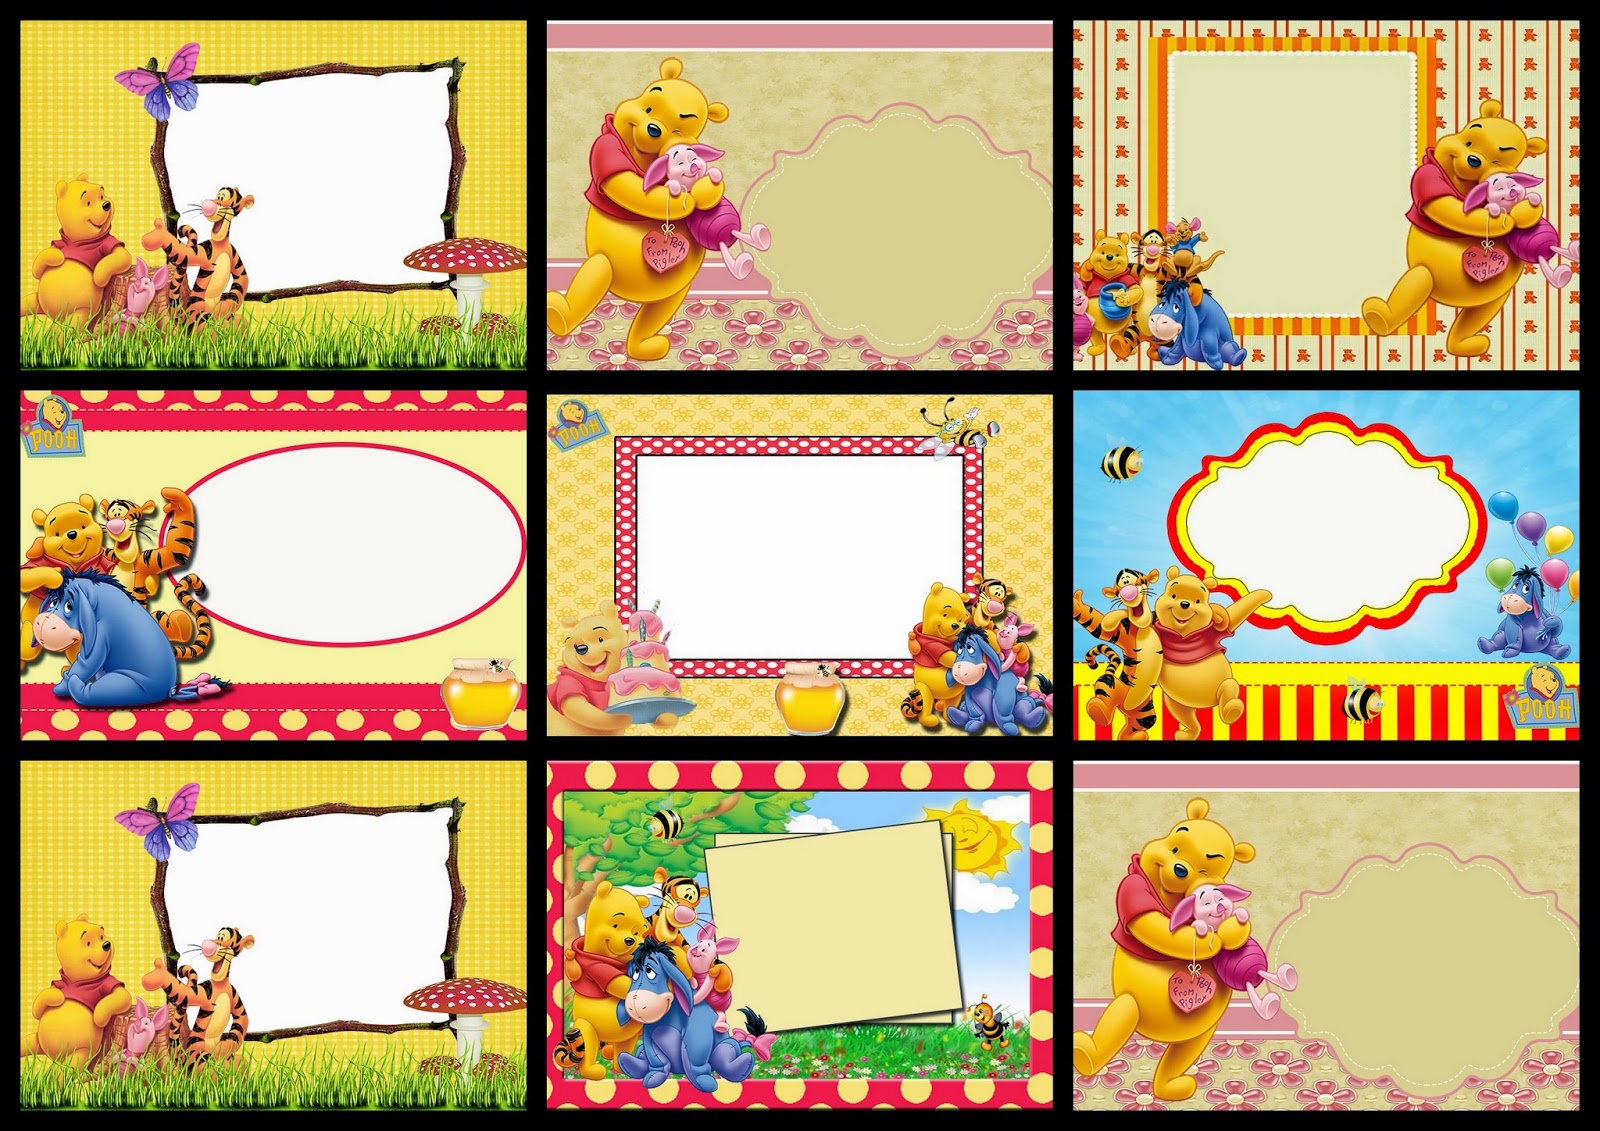 winnie-the-pooh-party-free-printable-invitations-oh-my-fiesta-in